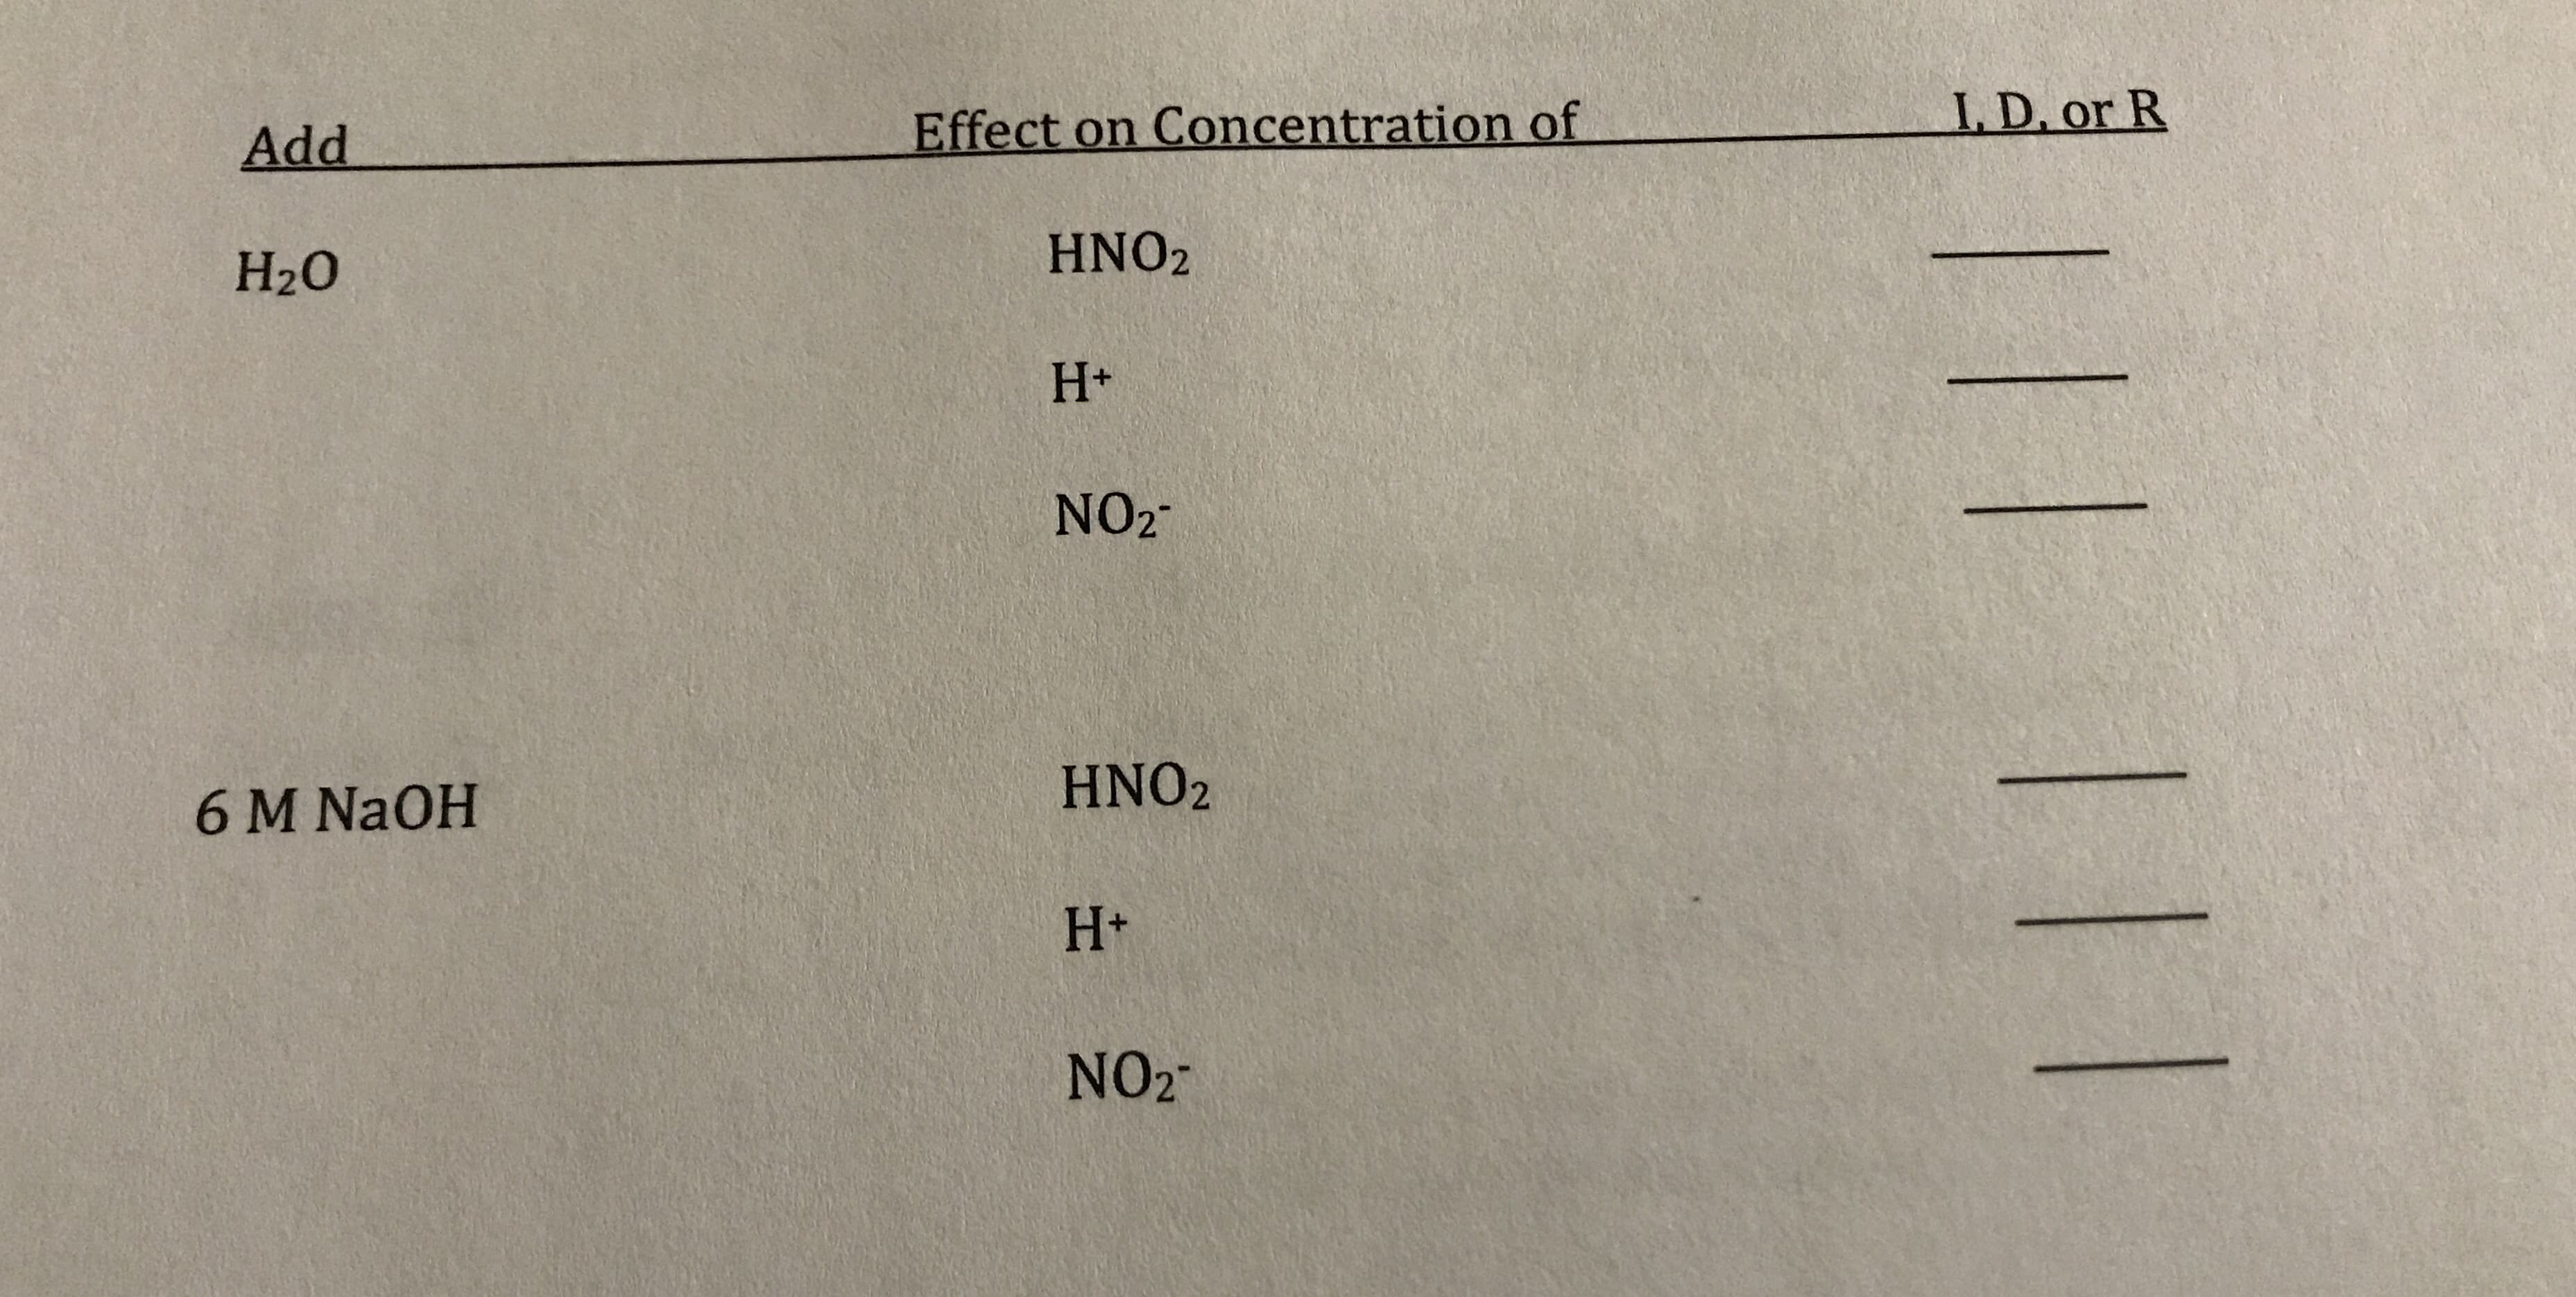 LD. or R
Effect on Concentration of
Add
HNO2
H20
H+
NO2
HNO2
6 M NAOH
H+
NO2
